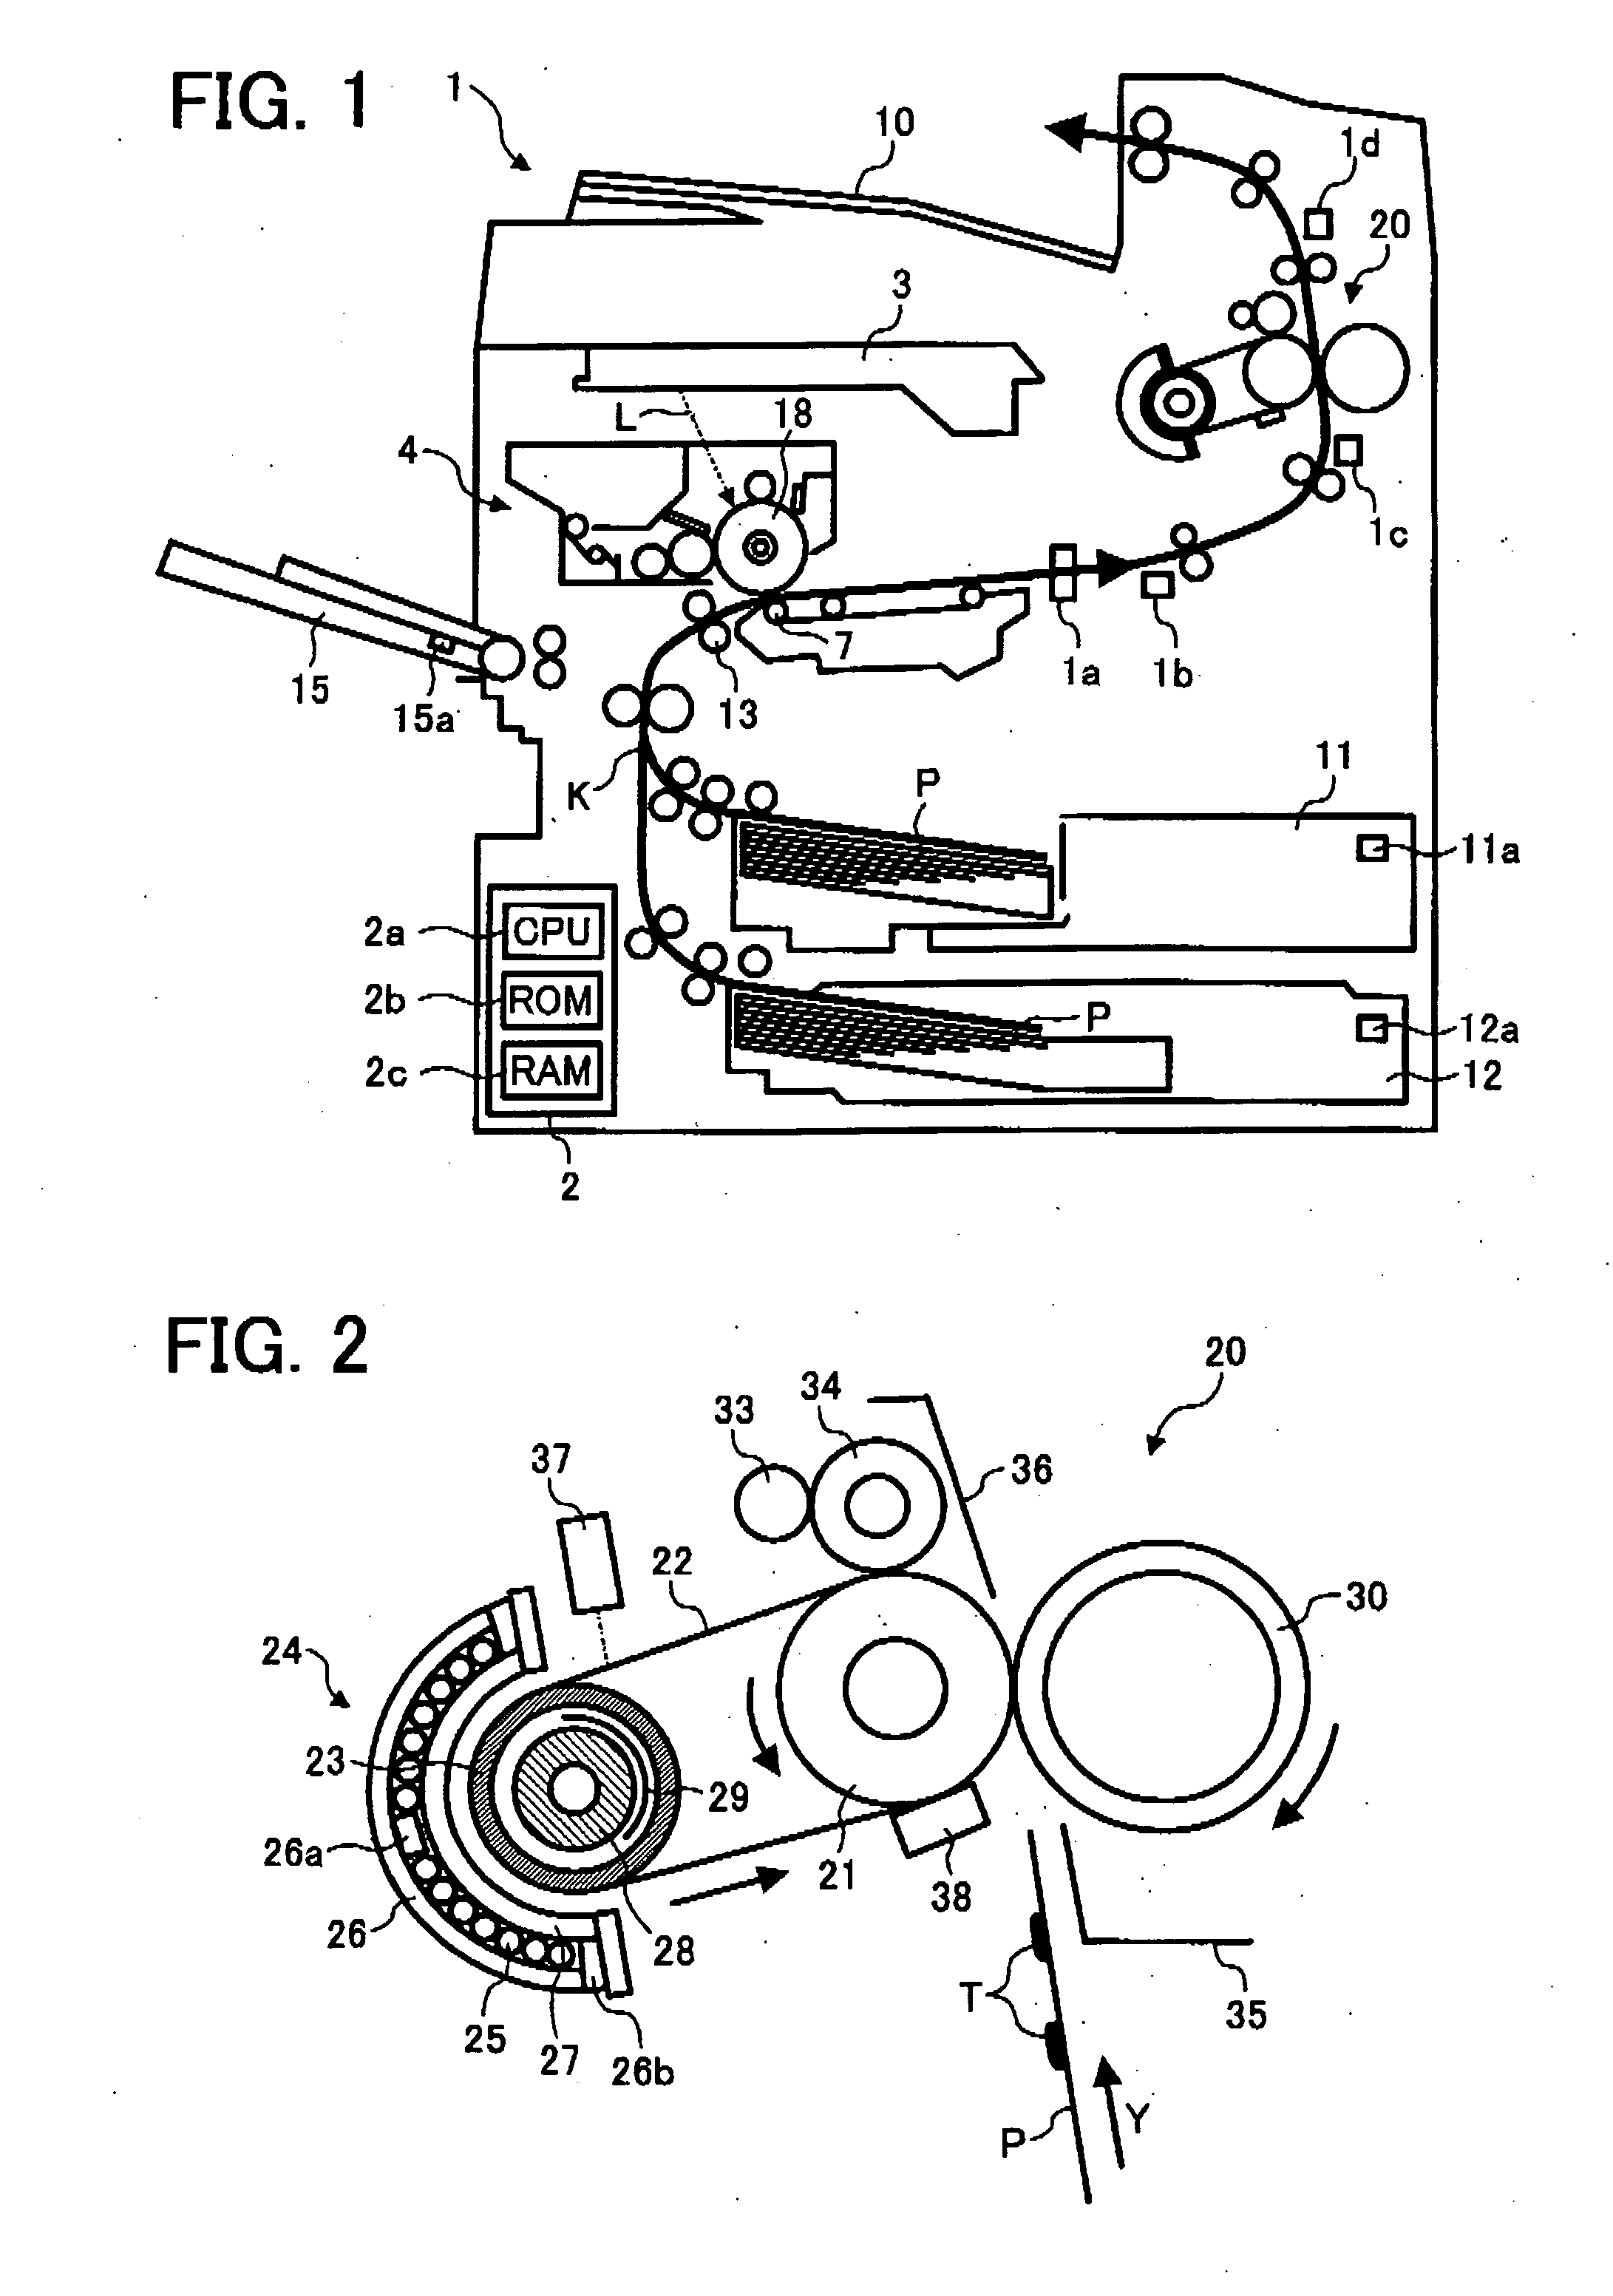 Image fixing apparatus stably controlling a fixing temperature, and image forming apparatus using the same